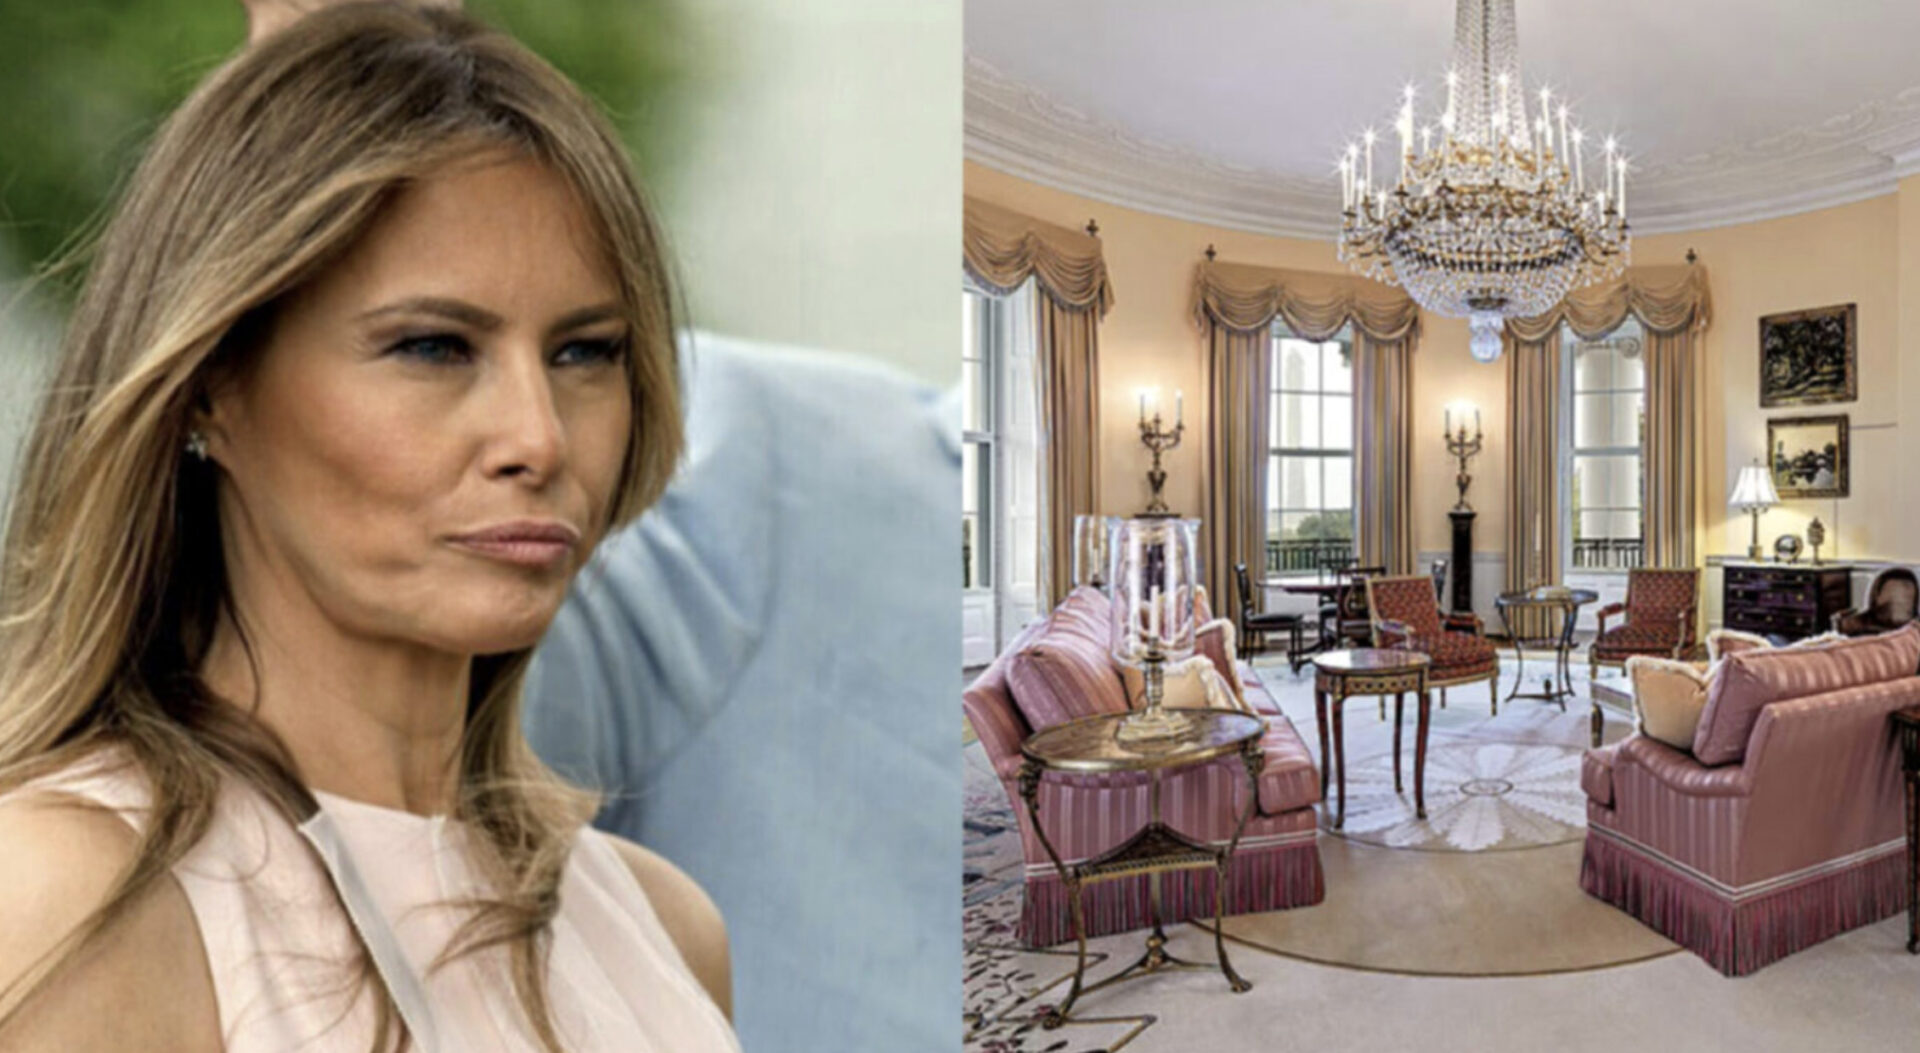 Melania Accuses Biden’s White House of Rearranging the Way She Decorated Private Quarters and She’s LIVID